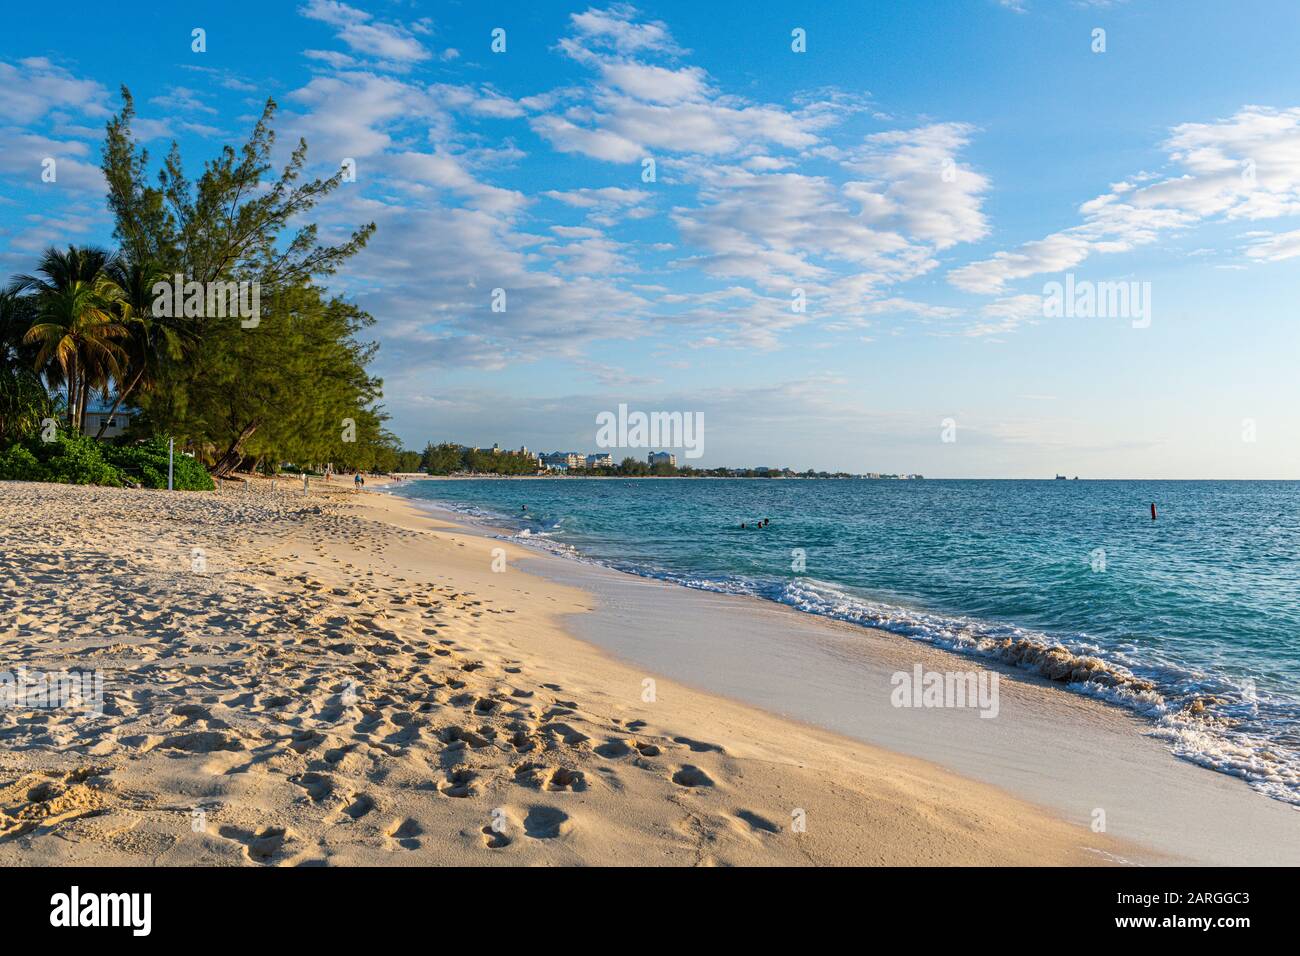 Governors Beach, part of Seven Mile Beach, Grand Cayman, Cayman Islands, Caribbean, Central America Stock Photo